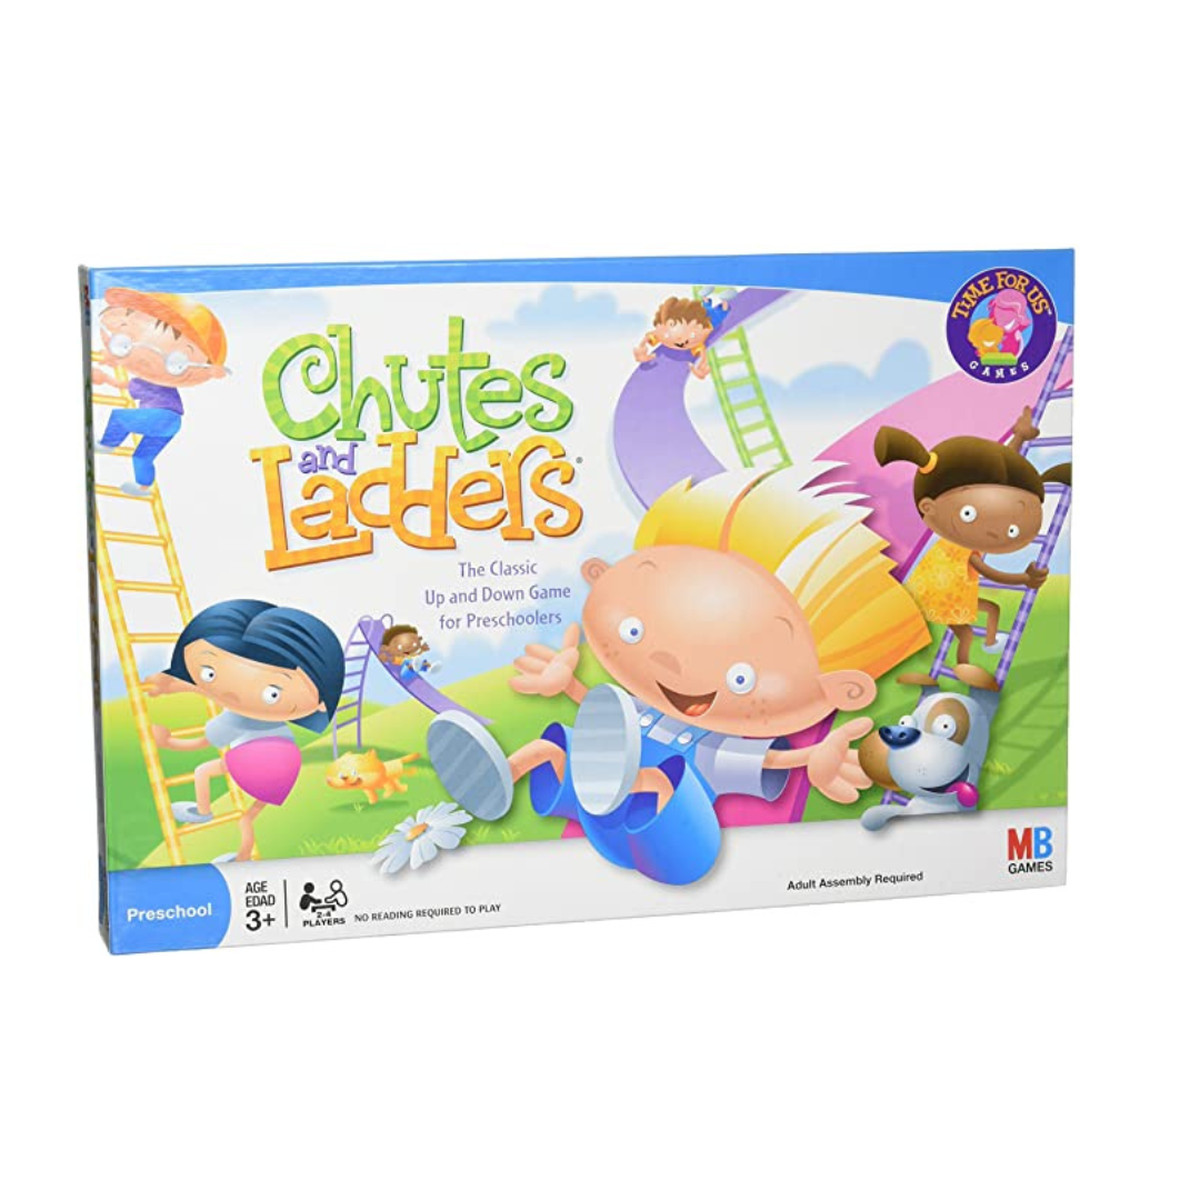 Chutes and Ladders, a classic board game for children with cartoons featured on front of box.